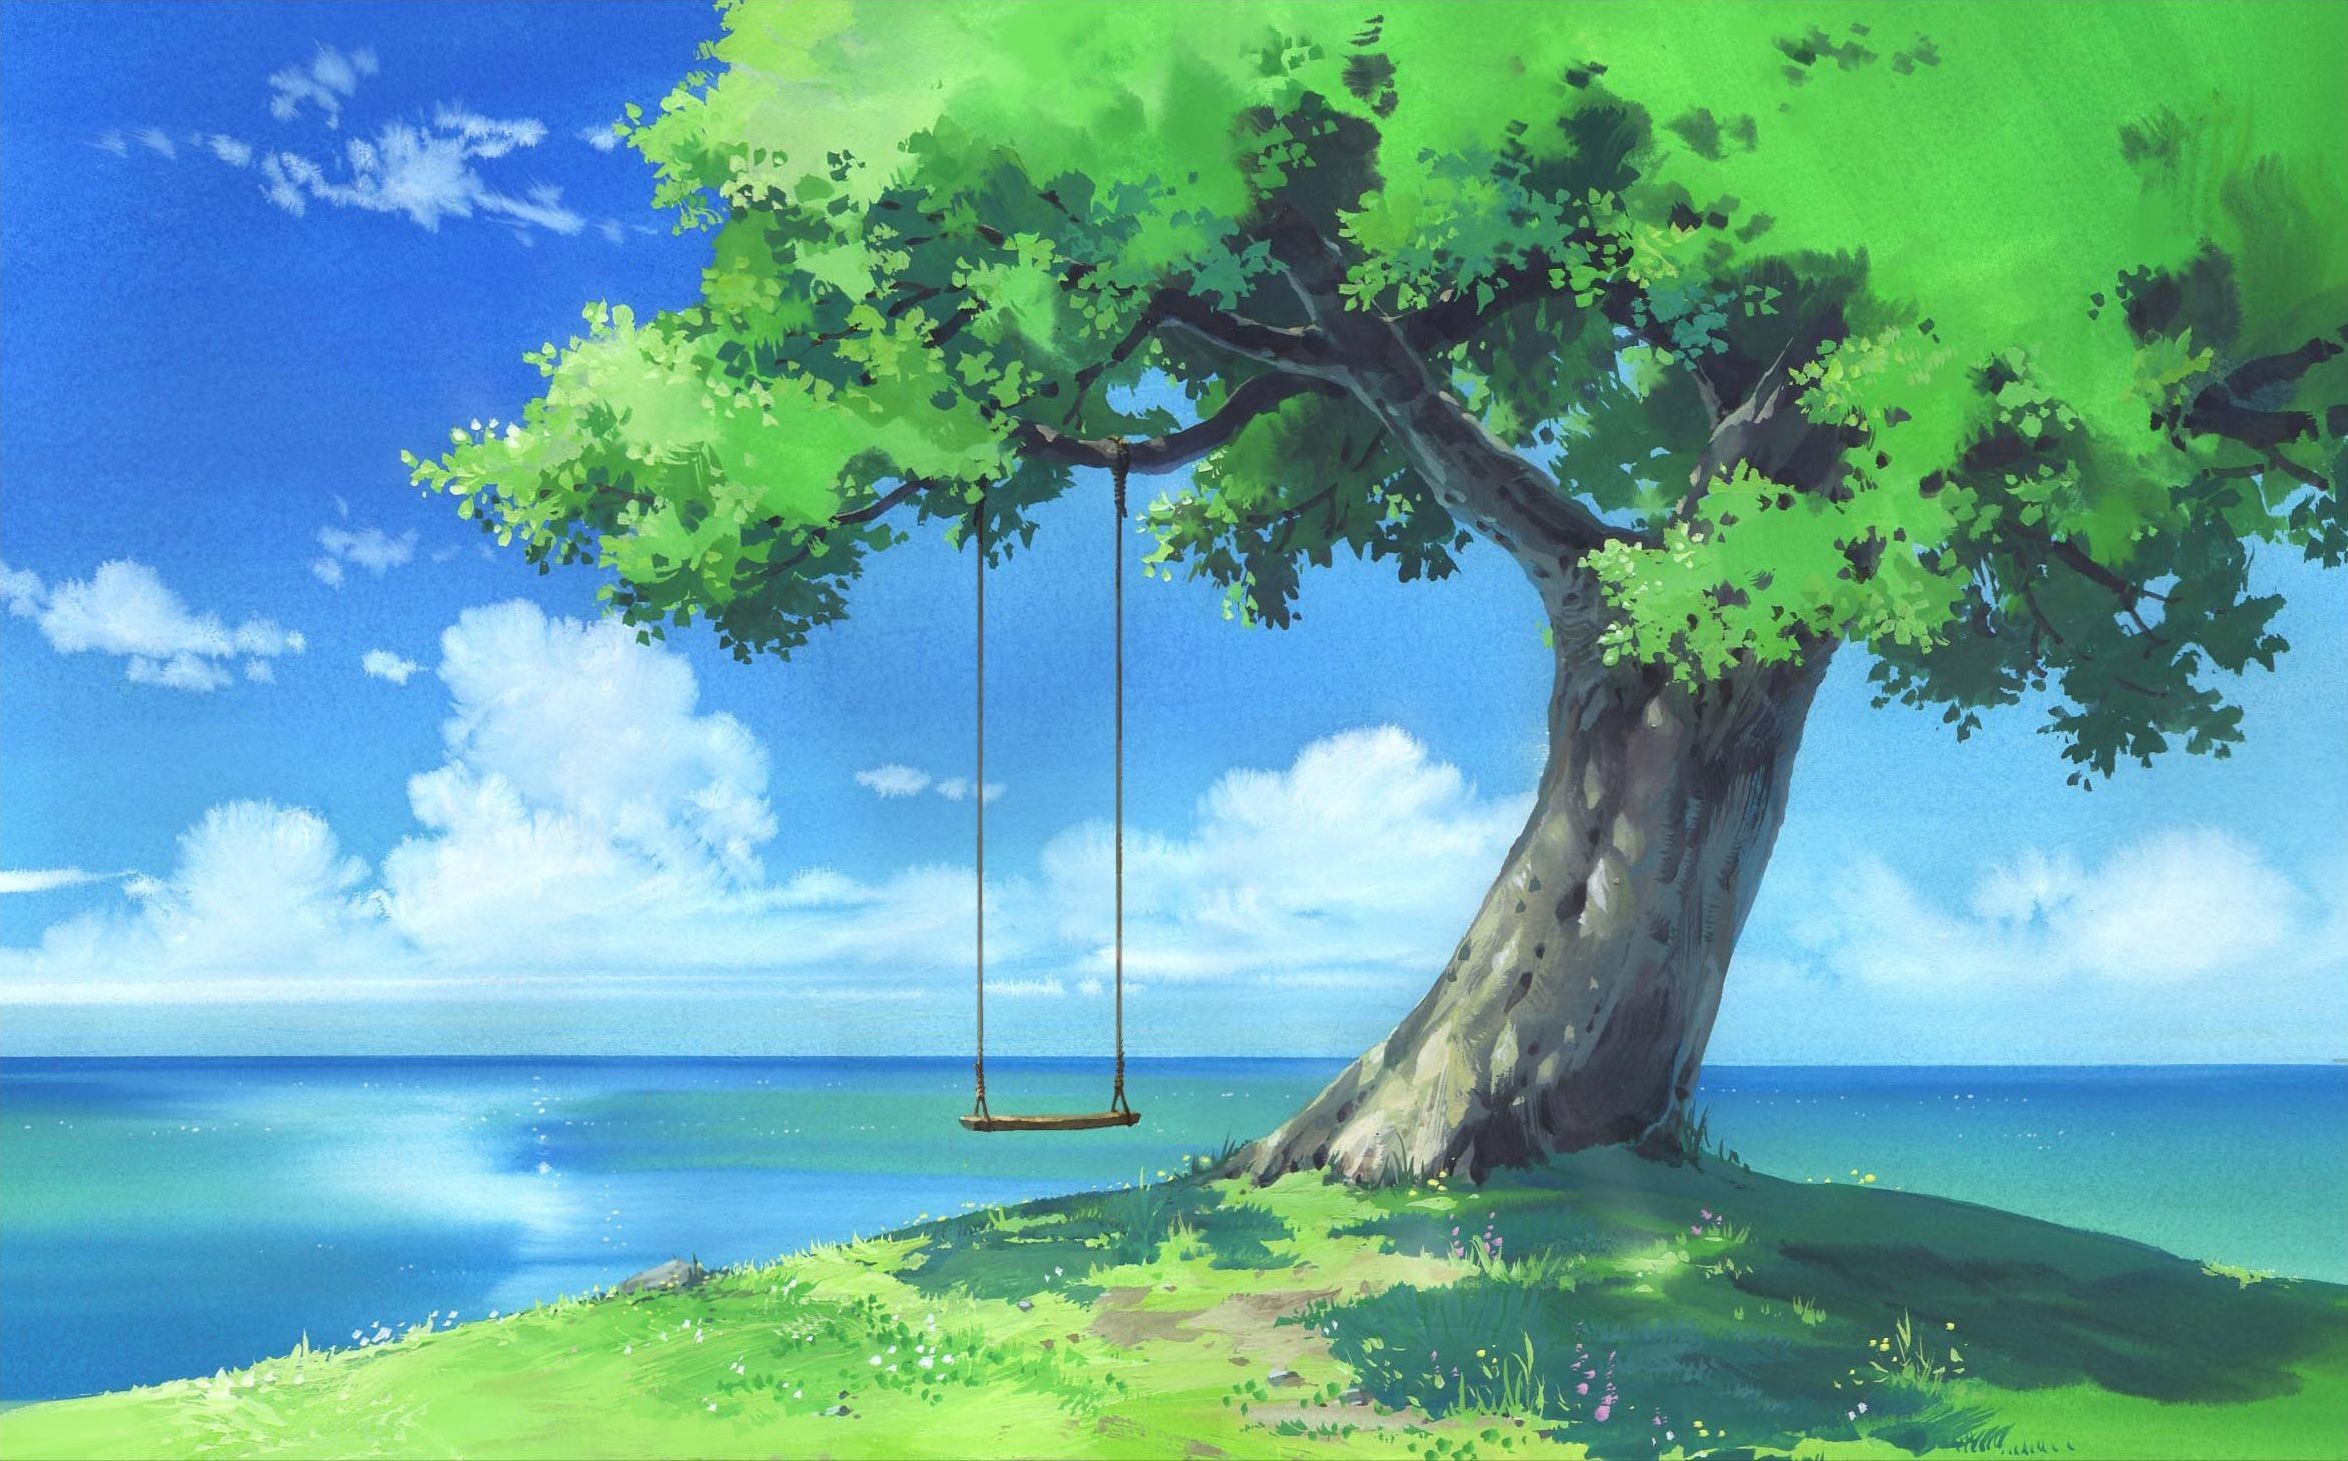 Poster Best Anime Scenery Beautiful Nature Dreamworld Anime Aesthetic Anime  Scenes Hd Matte Finish Paper Poster Print 12 x 18 Inch (Multicolor)PB-27050  : Amazon.in: Home & Kitchen